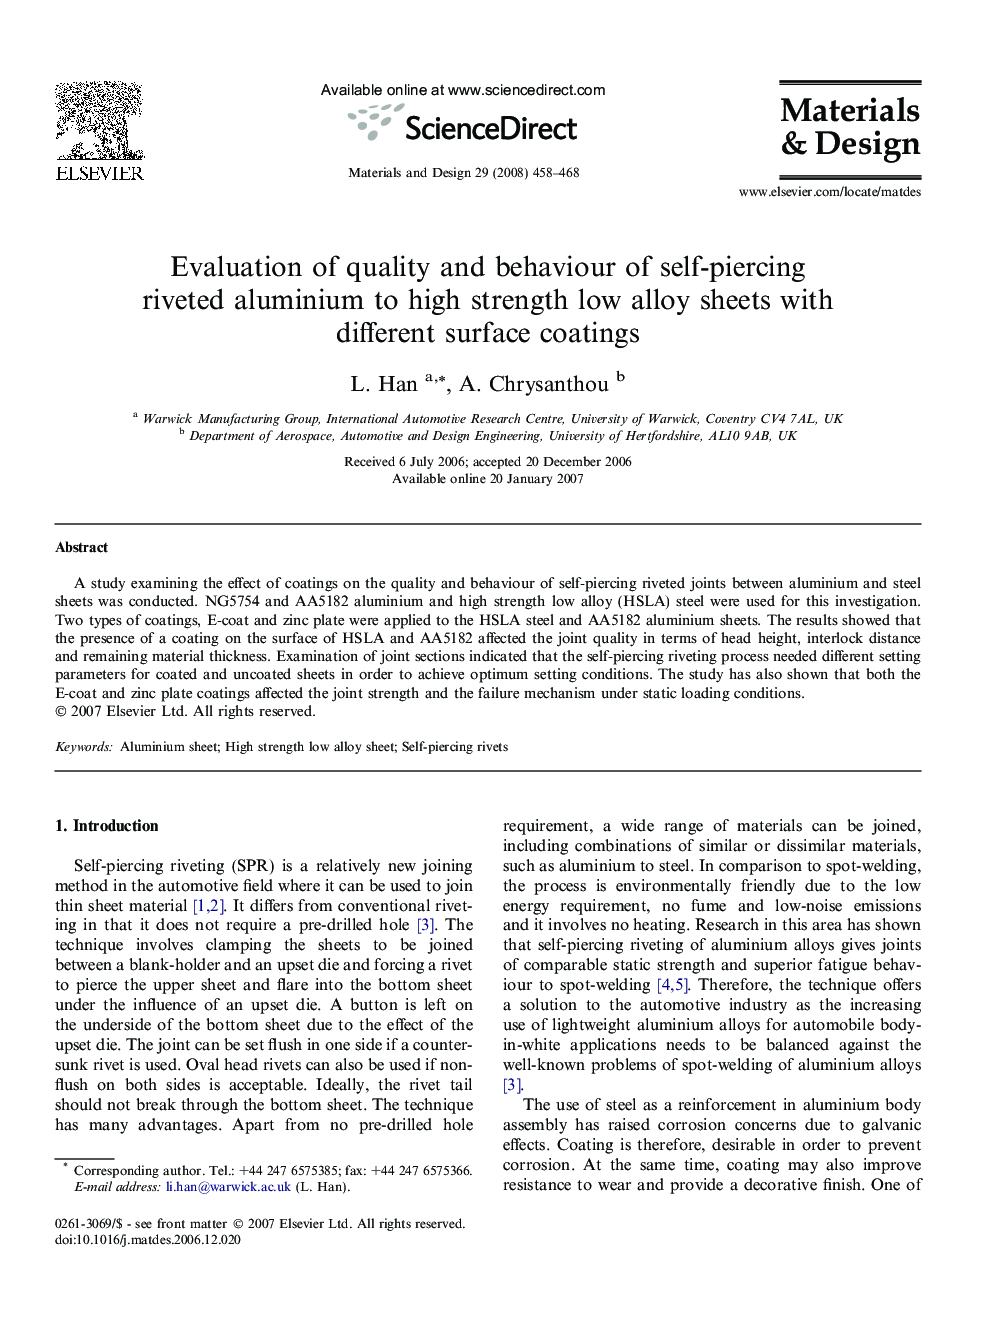 Evaluation of quality and behaviour of self-piercing riveted aluminium to high strength low alloy sheets with different surface coatings